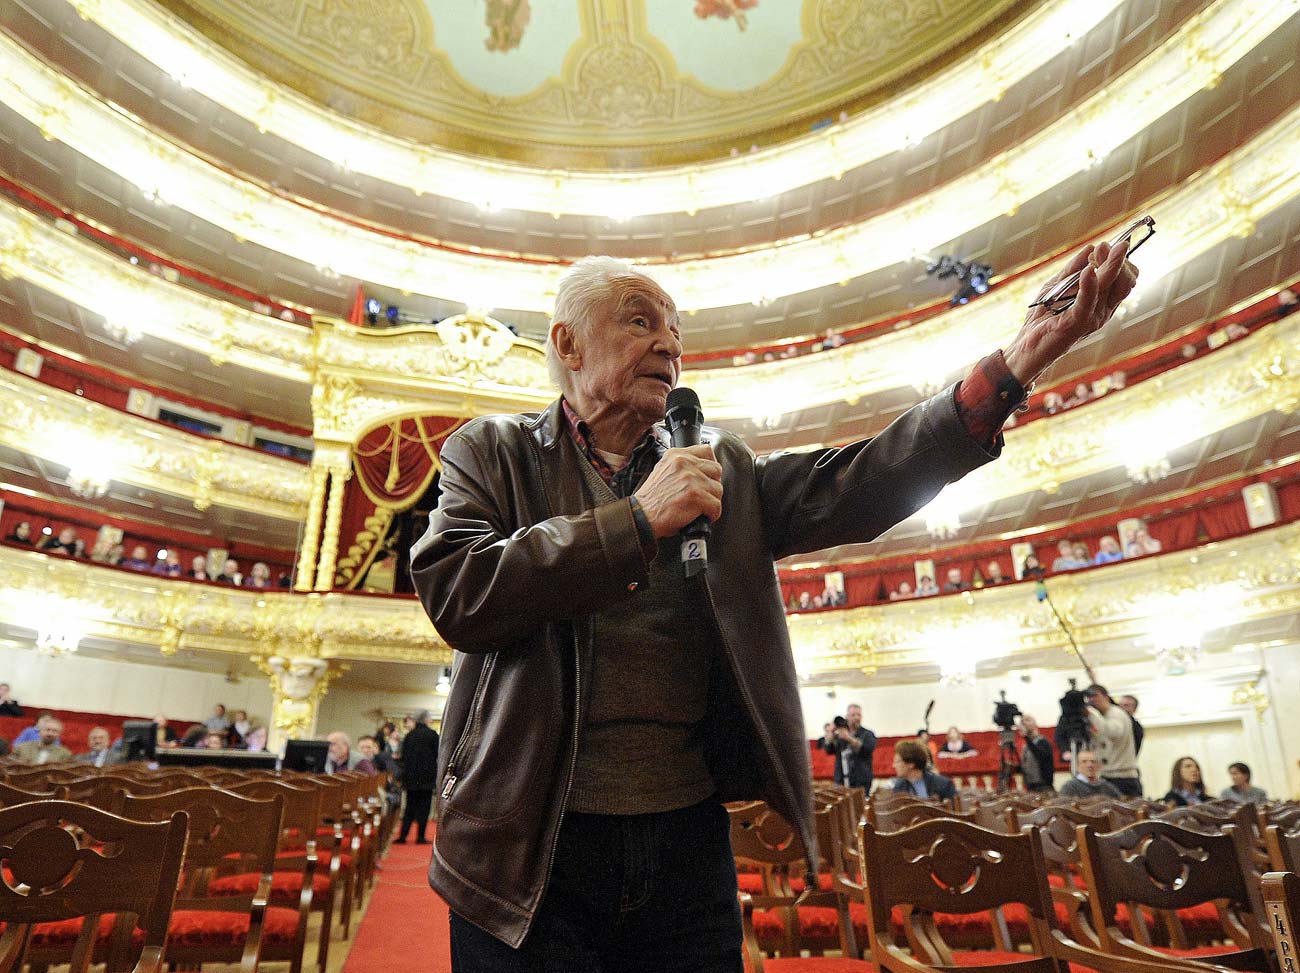 Ballet master Yuri Grigorovich directs the rehearsal of Peter Tchaikovsky's "Sleeping Beauty" ballet at the state academic Bolshoi Theatre